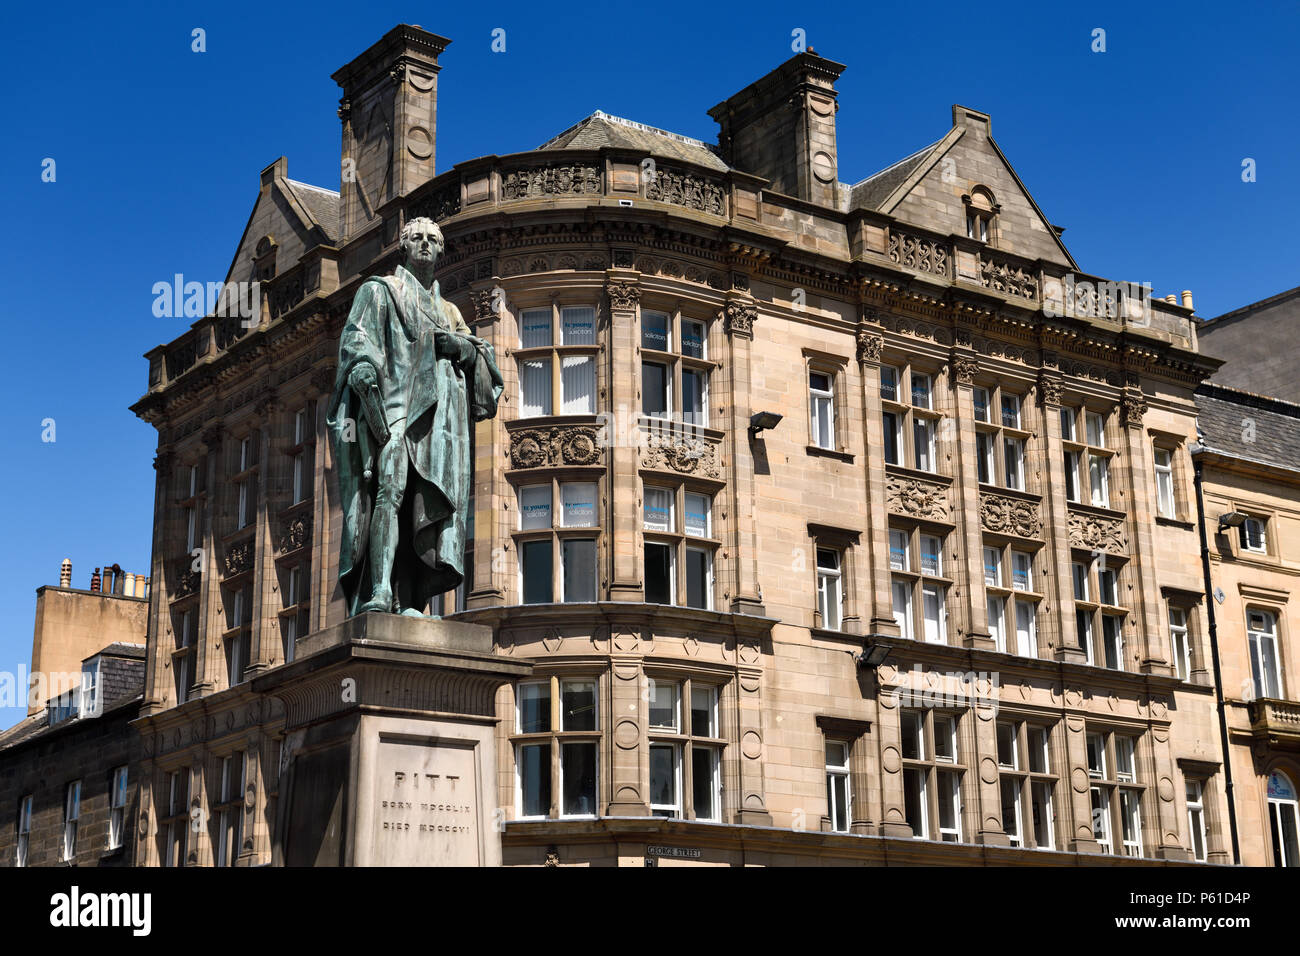 Bronze statue of William Pitt the Younger a British Prime Minister on George and Frederick streets Edinburgh Scotland with historic buildings Stock Photo